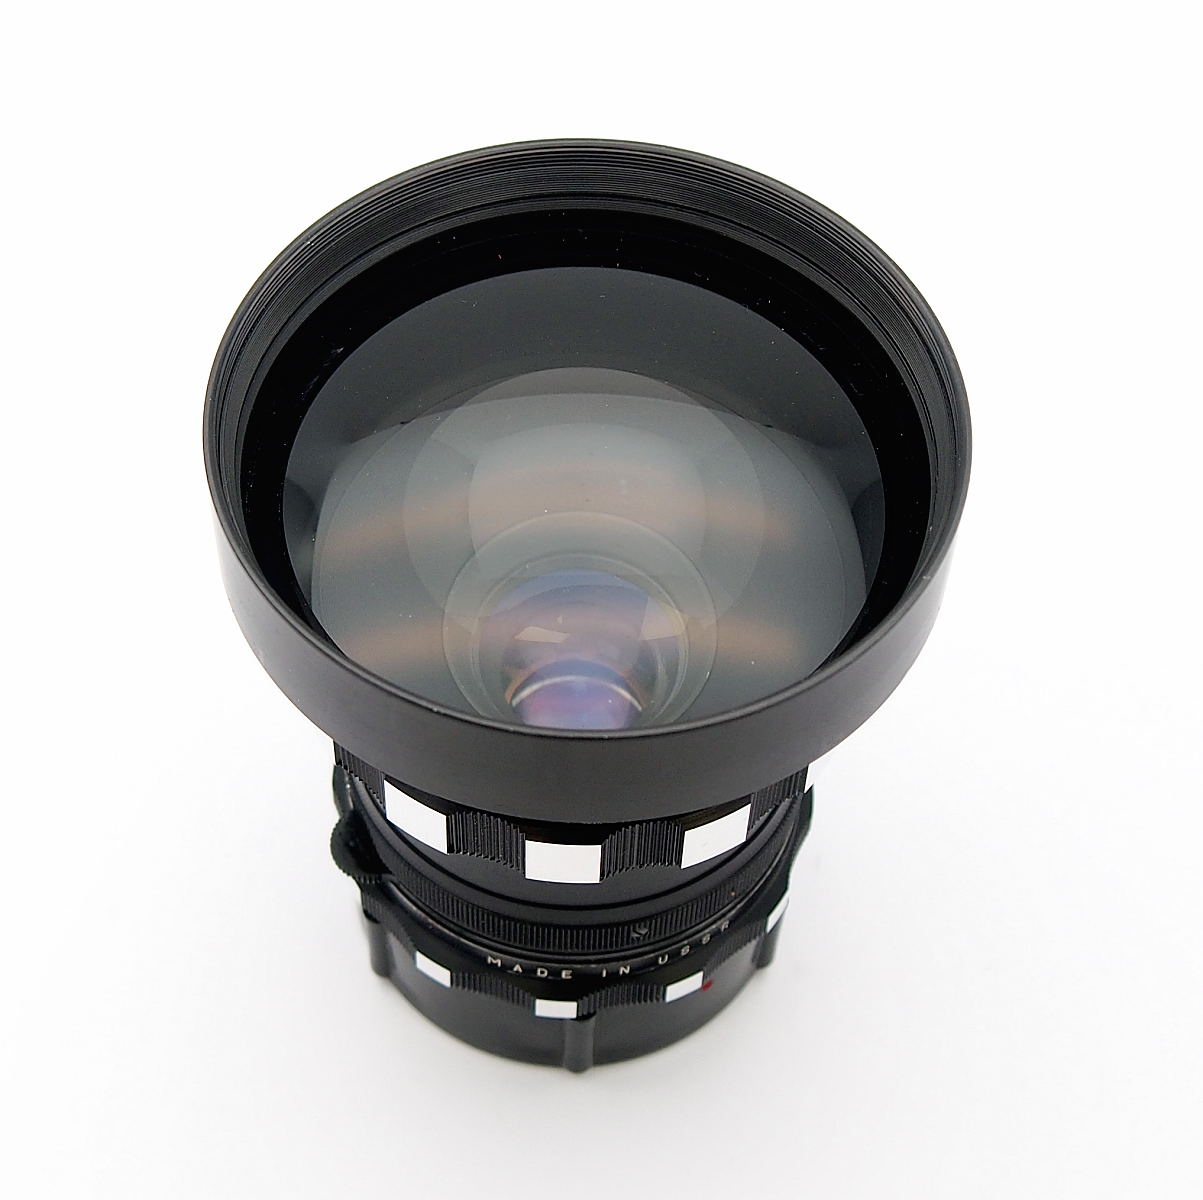 MIR 3 65mm F3.5 Wide Angle for Zenith 80, Case & Filters #9772